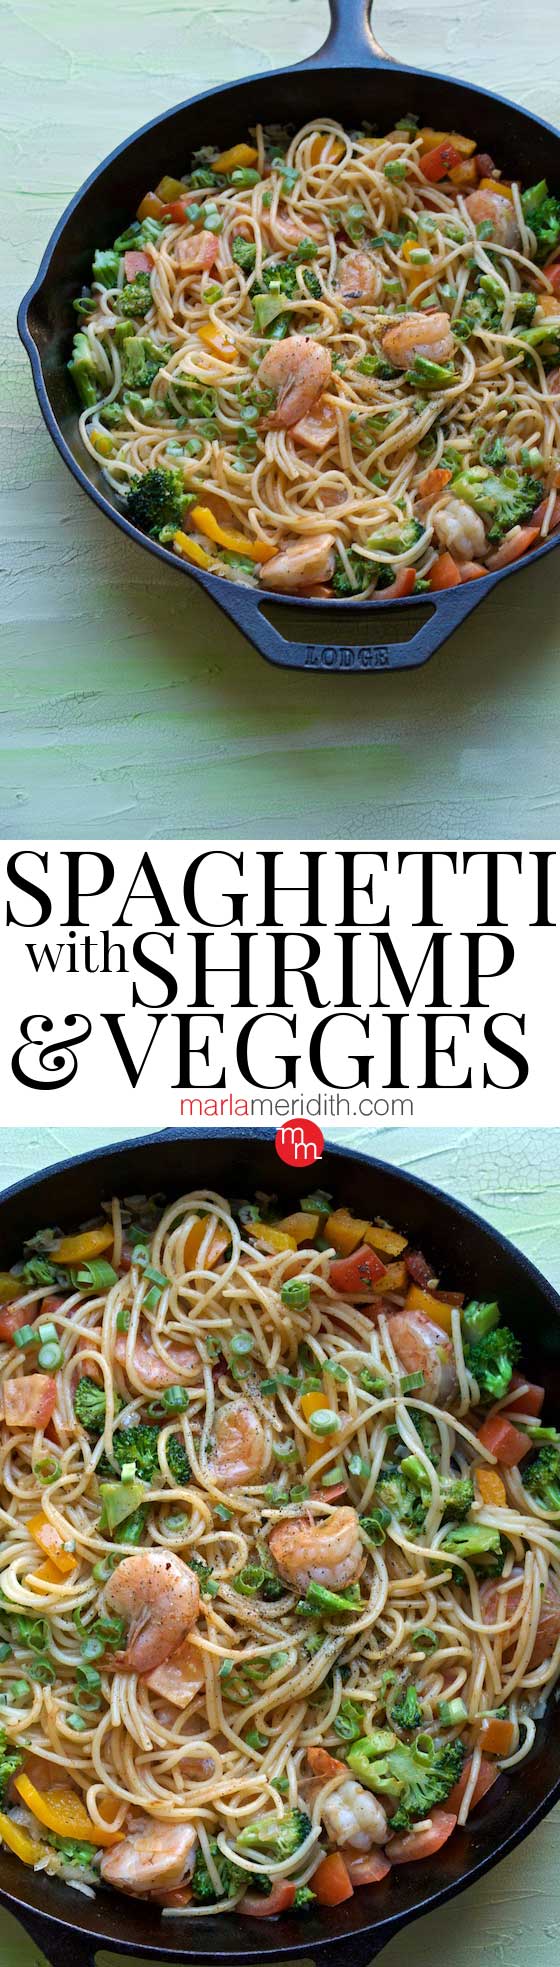 Spaghetti with Shrimp & Vegetables, a healthy, protein packed & delicious pasta recipe! MarlaMeridith.com #recipe #pasta